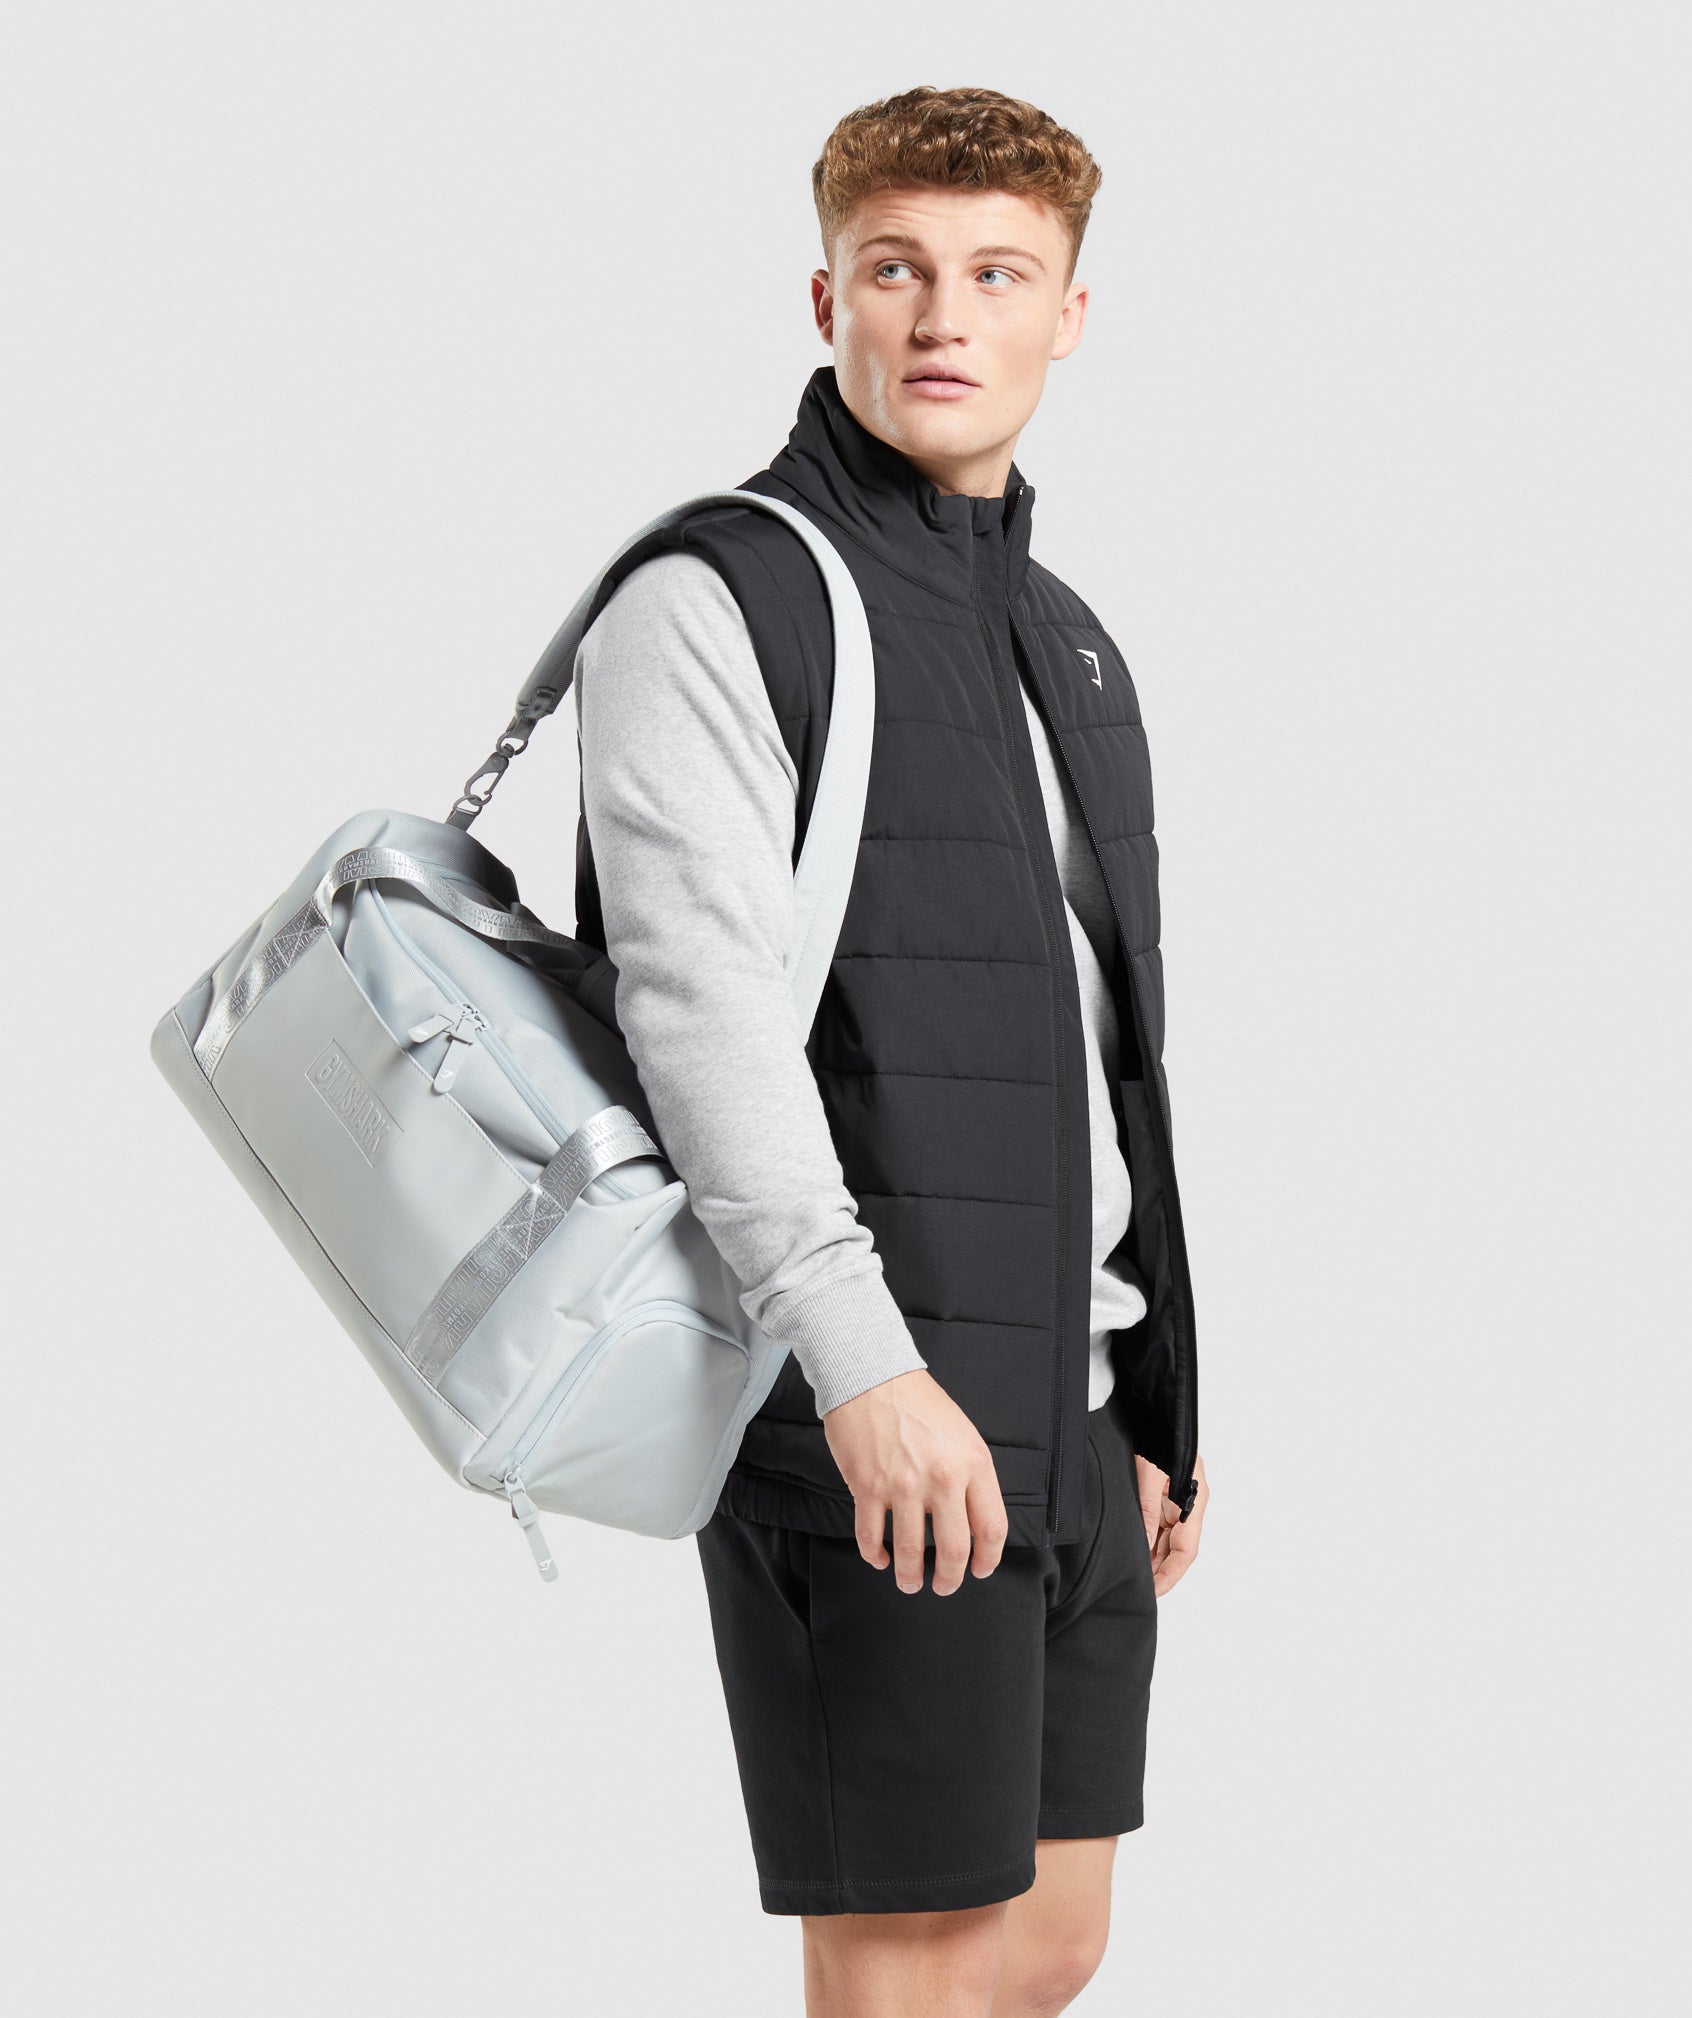 Small Everyday Gym Bag in Light Grey - view 7